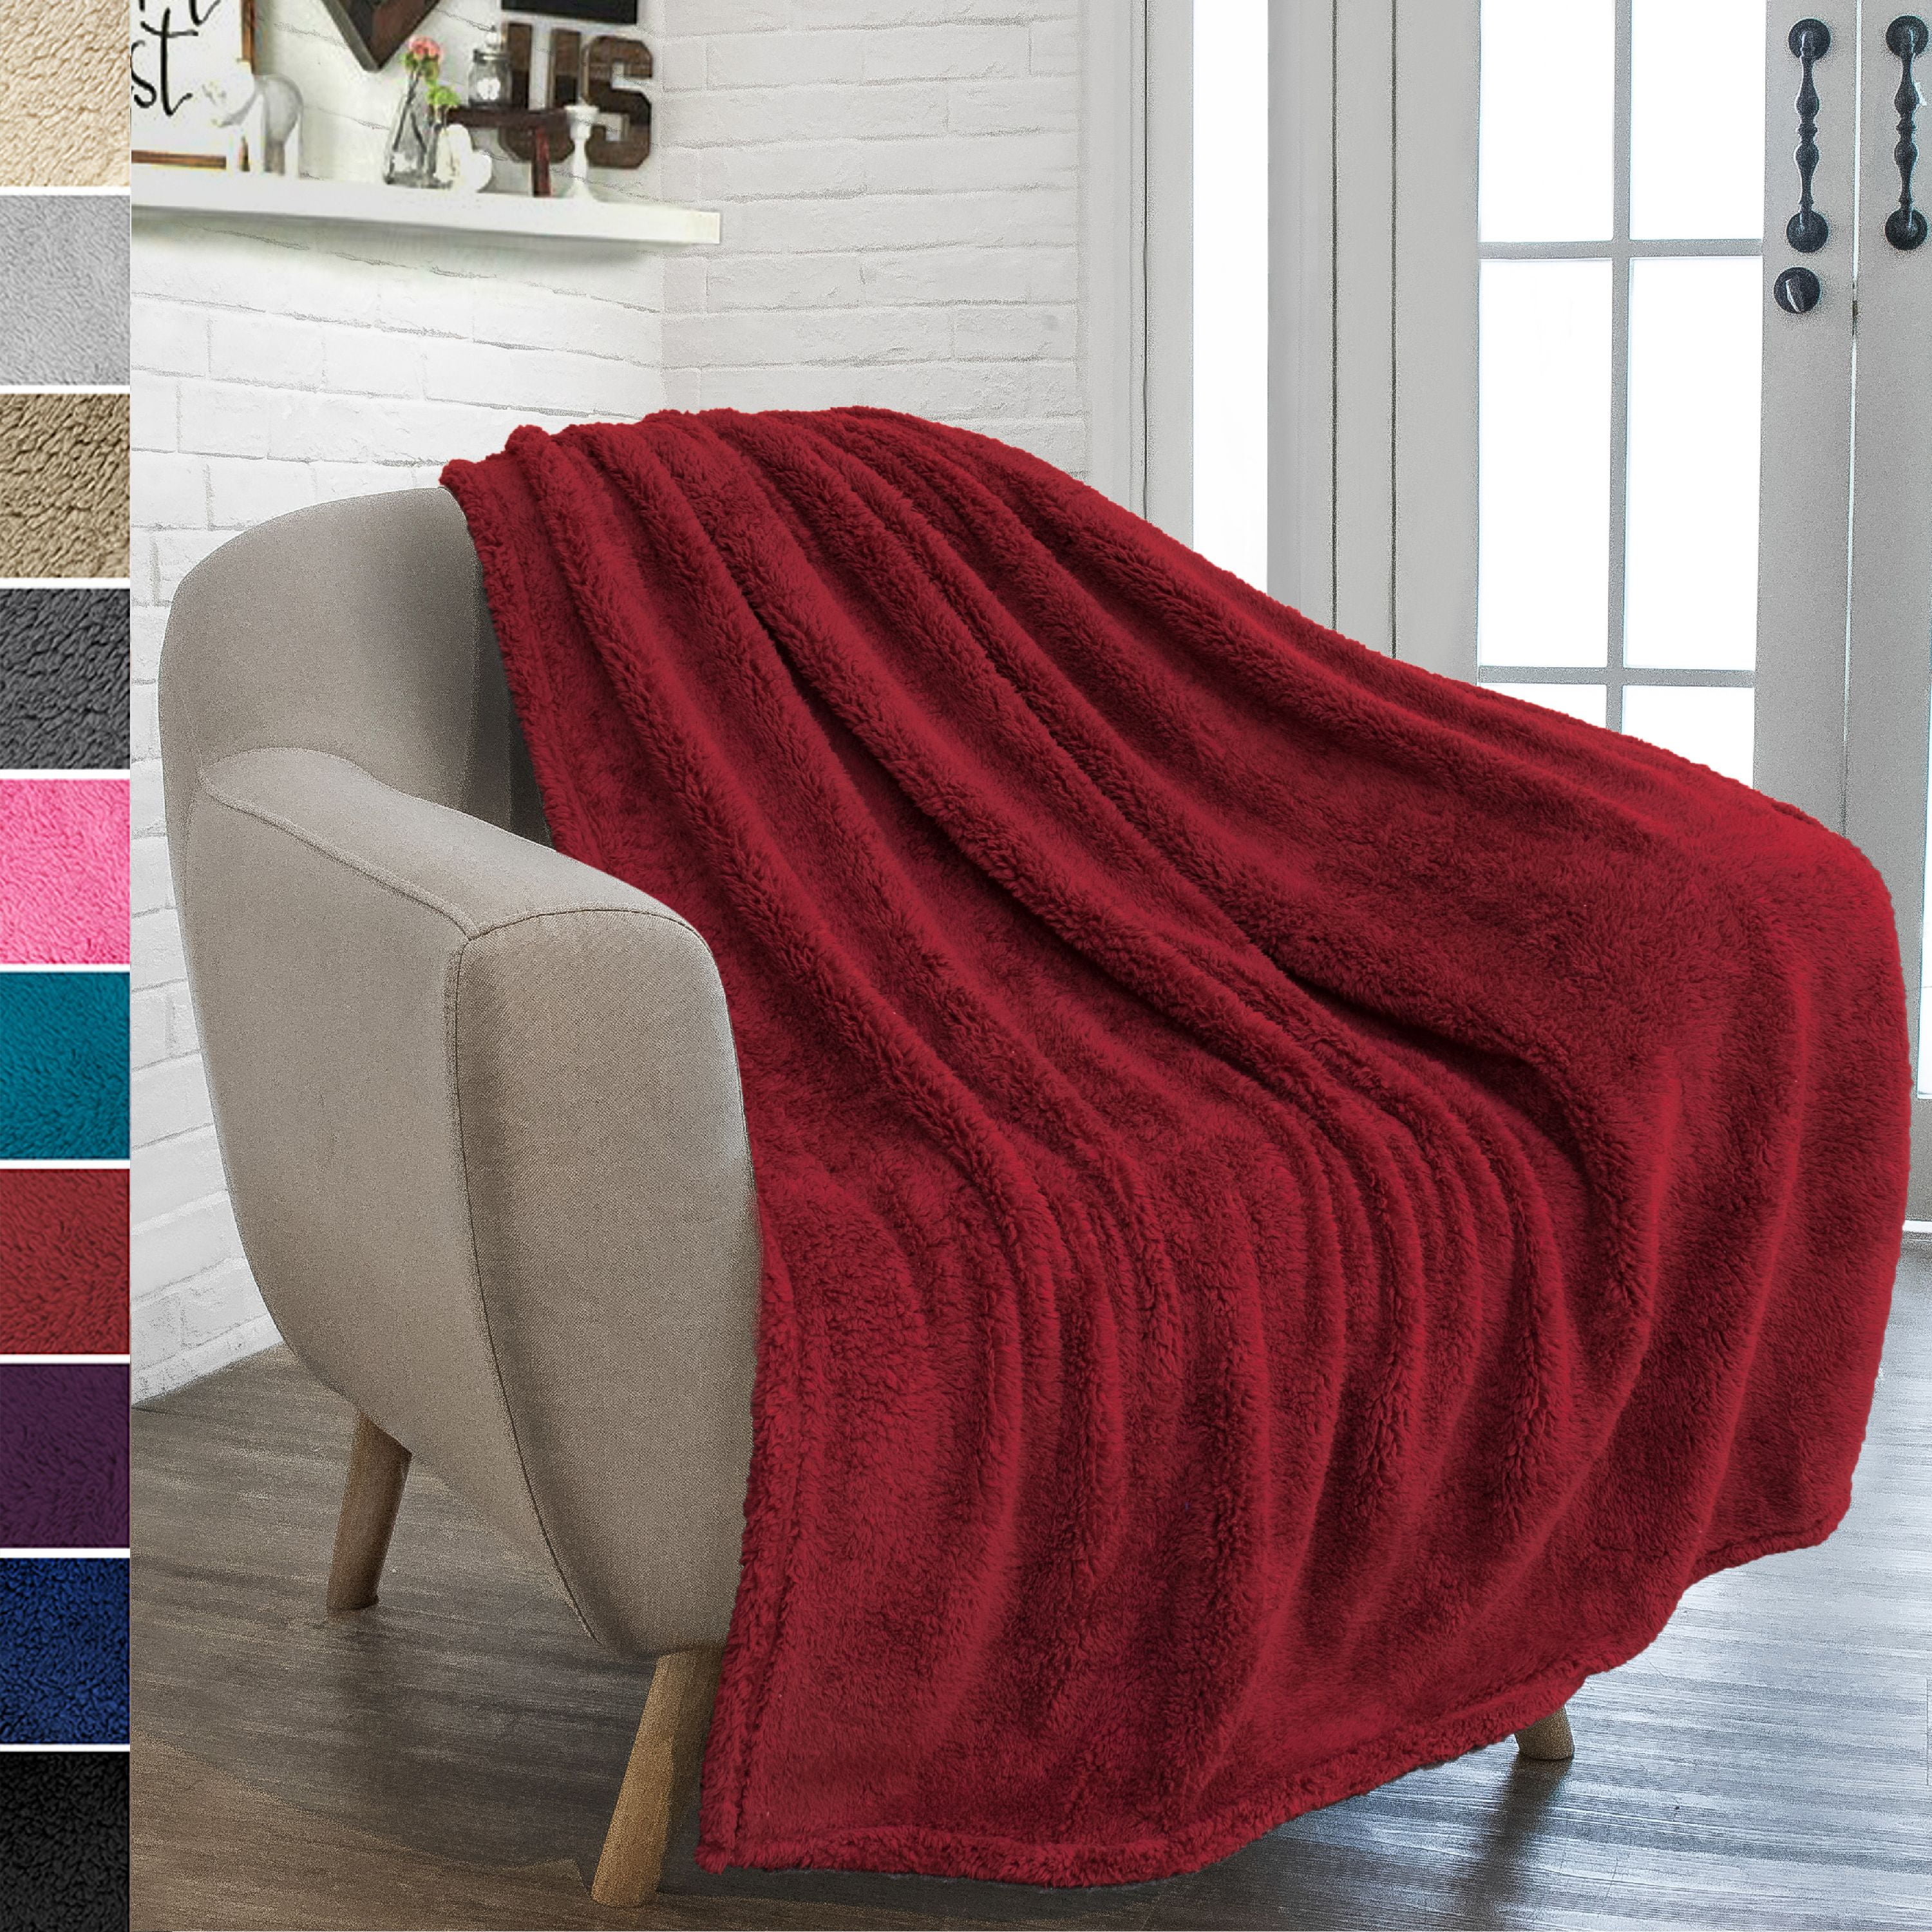 Exclusivo Mezcla Fleece Throw Blanket for Couch/Sofa/Bed,Plush Soft Blankets and Throws,Lightweight and Cozy Coffee 50 x 70 